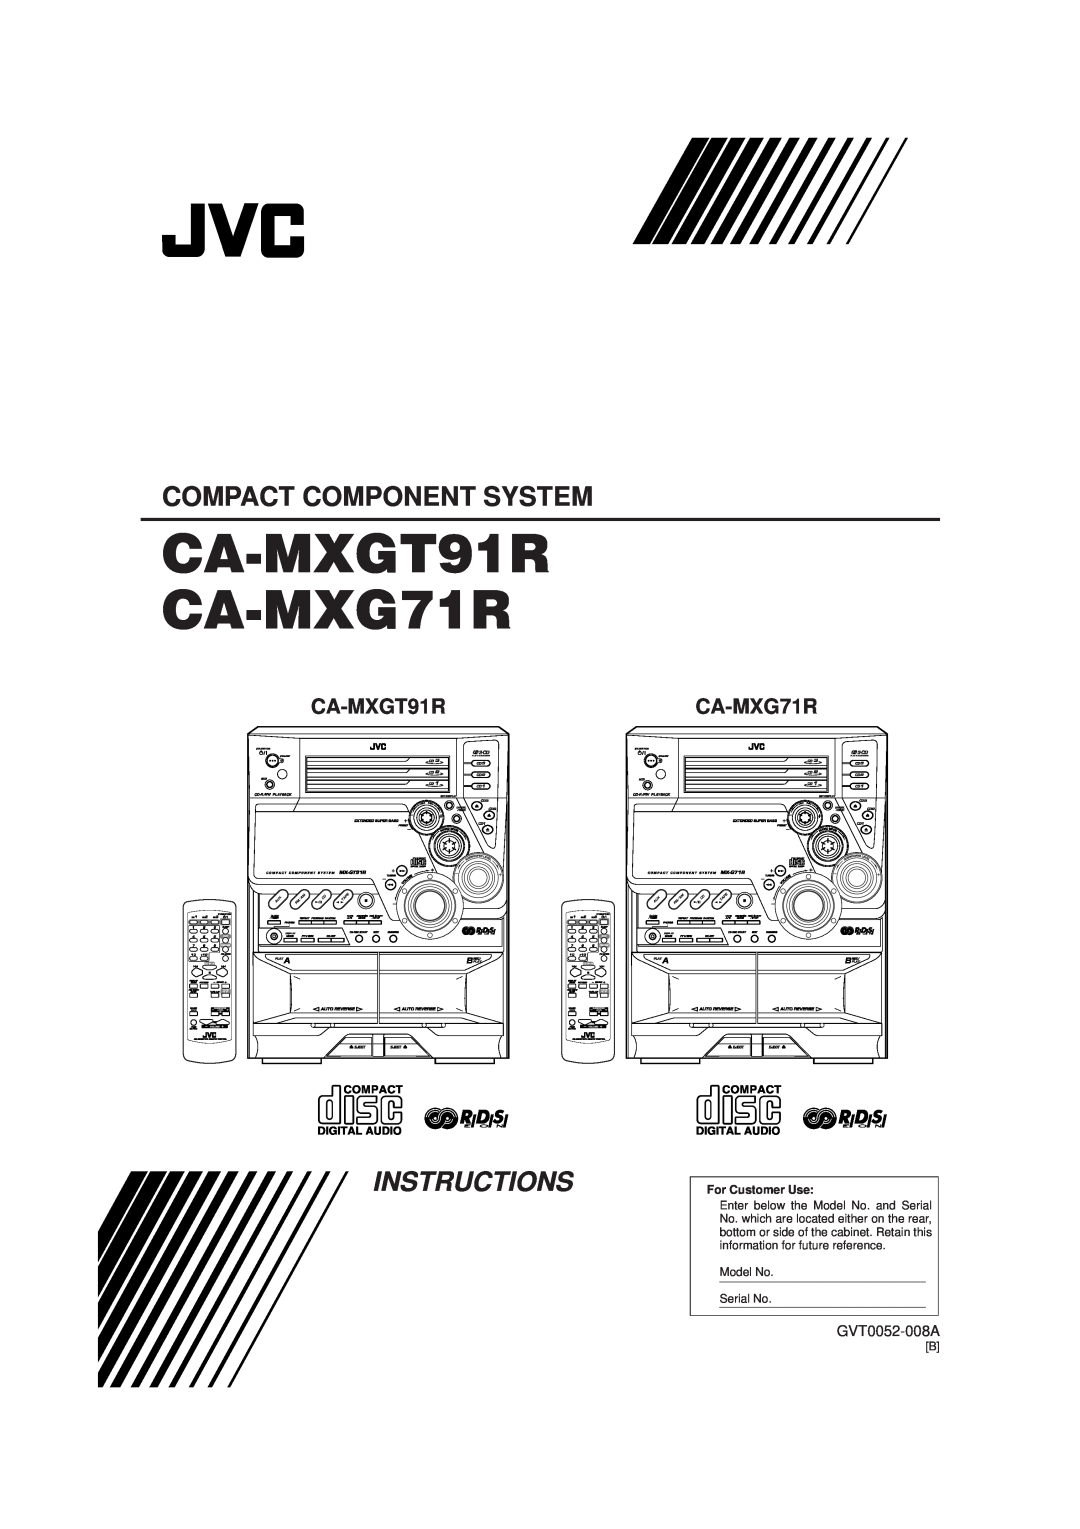 JVC GVT0052-008A manual CA-MXGT91R CA-MXG71R, Compact Component System, Instructions, For Customer Use, MX-GT91R, MX-G71R 